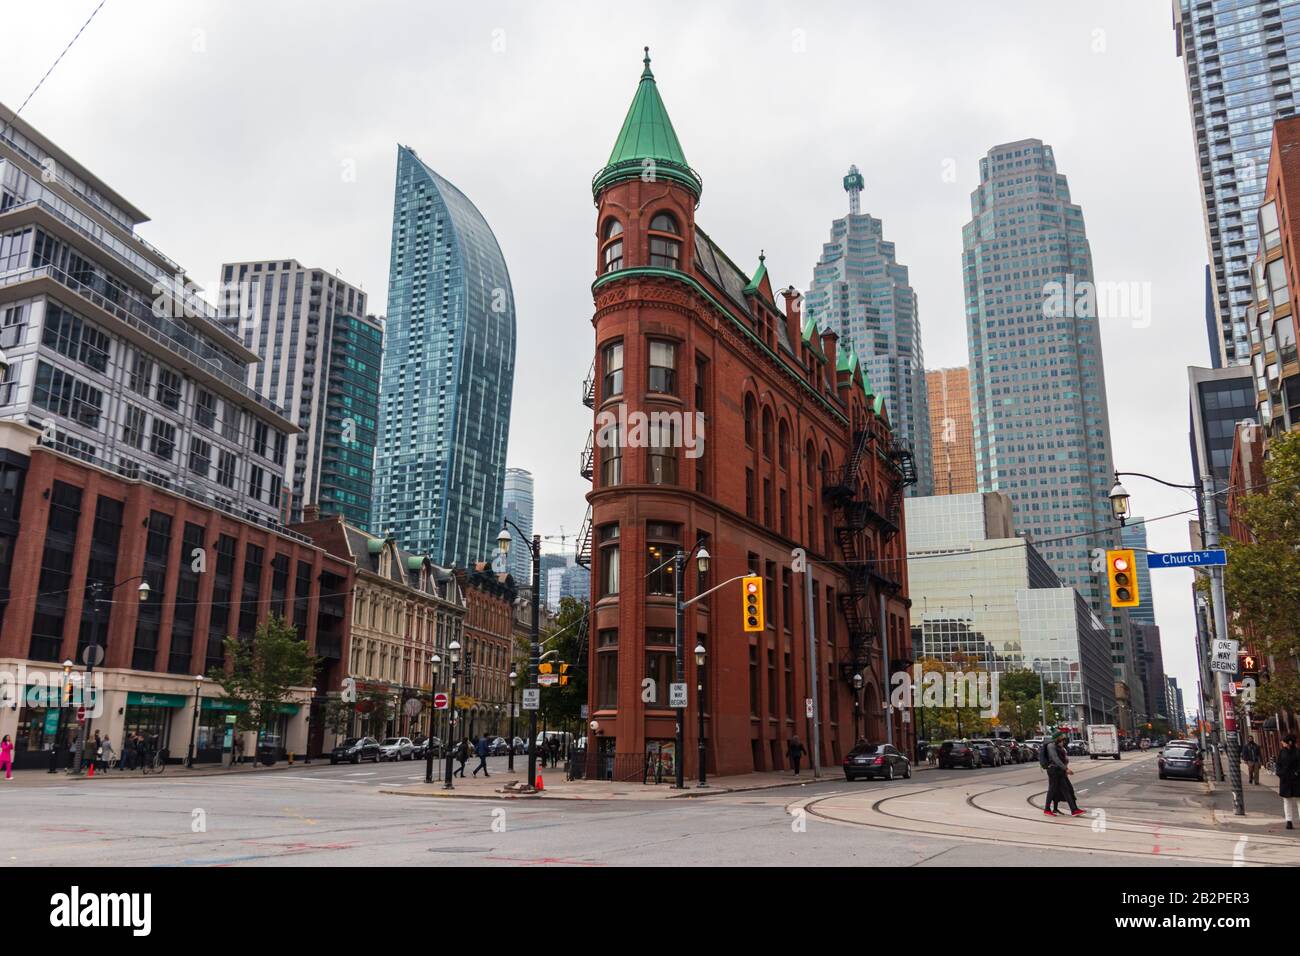 The famous Gooderham Building pictured on a cloudy fall afternoon in downtown Toronto. Stock Photo